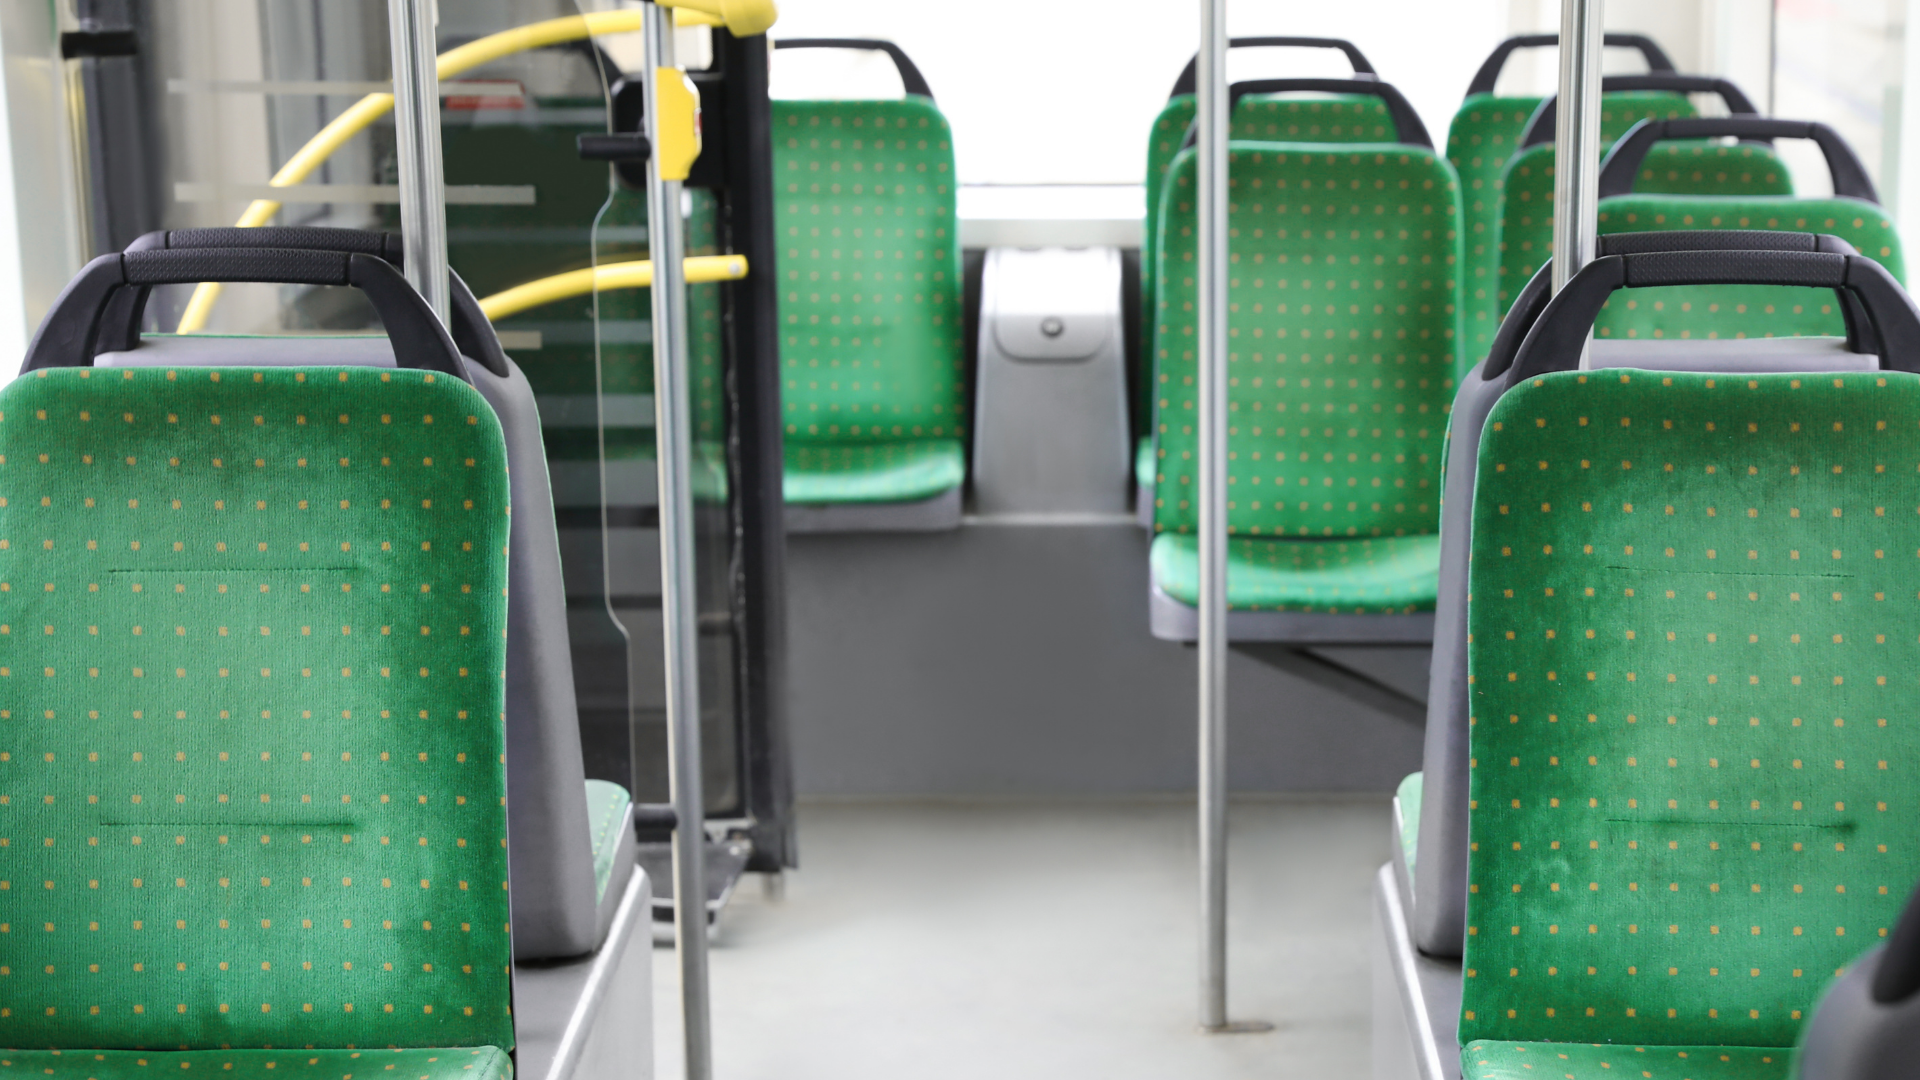 Developing smart tools for green public transport